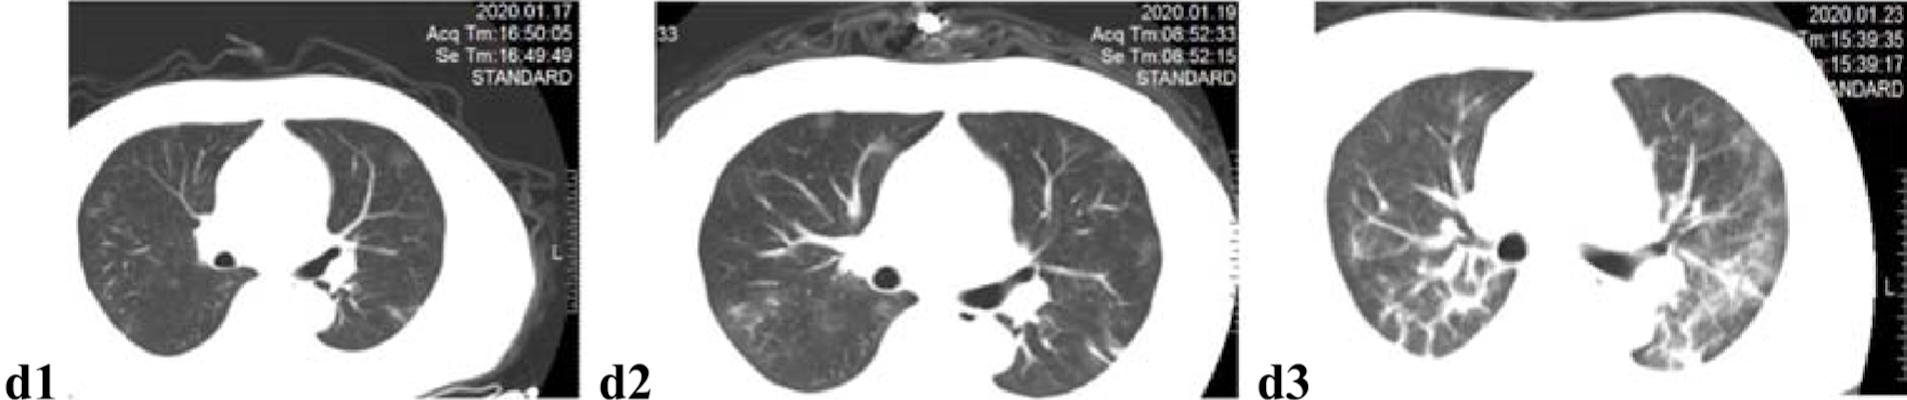 Unehanced axial CT images of a 52-year-old male doctor with asthma show the progression of novel coronavirus pneumonia